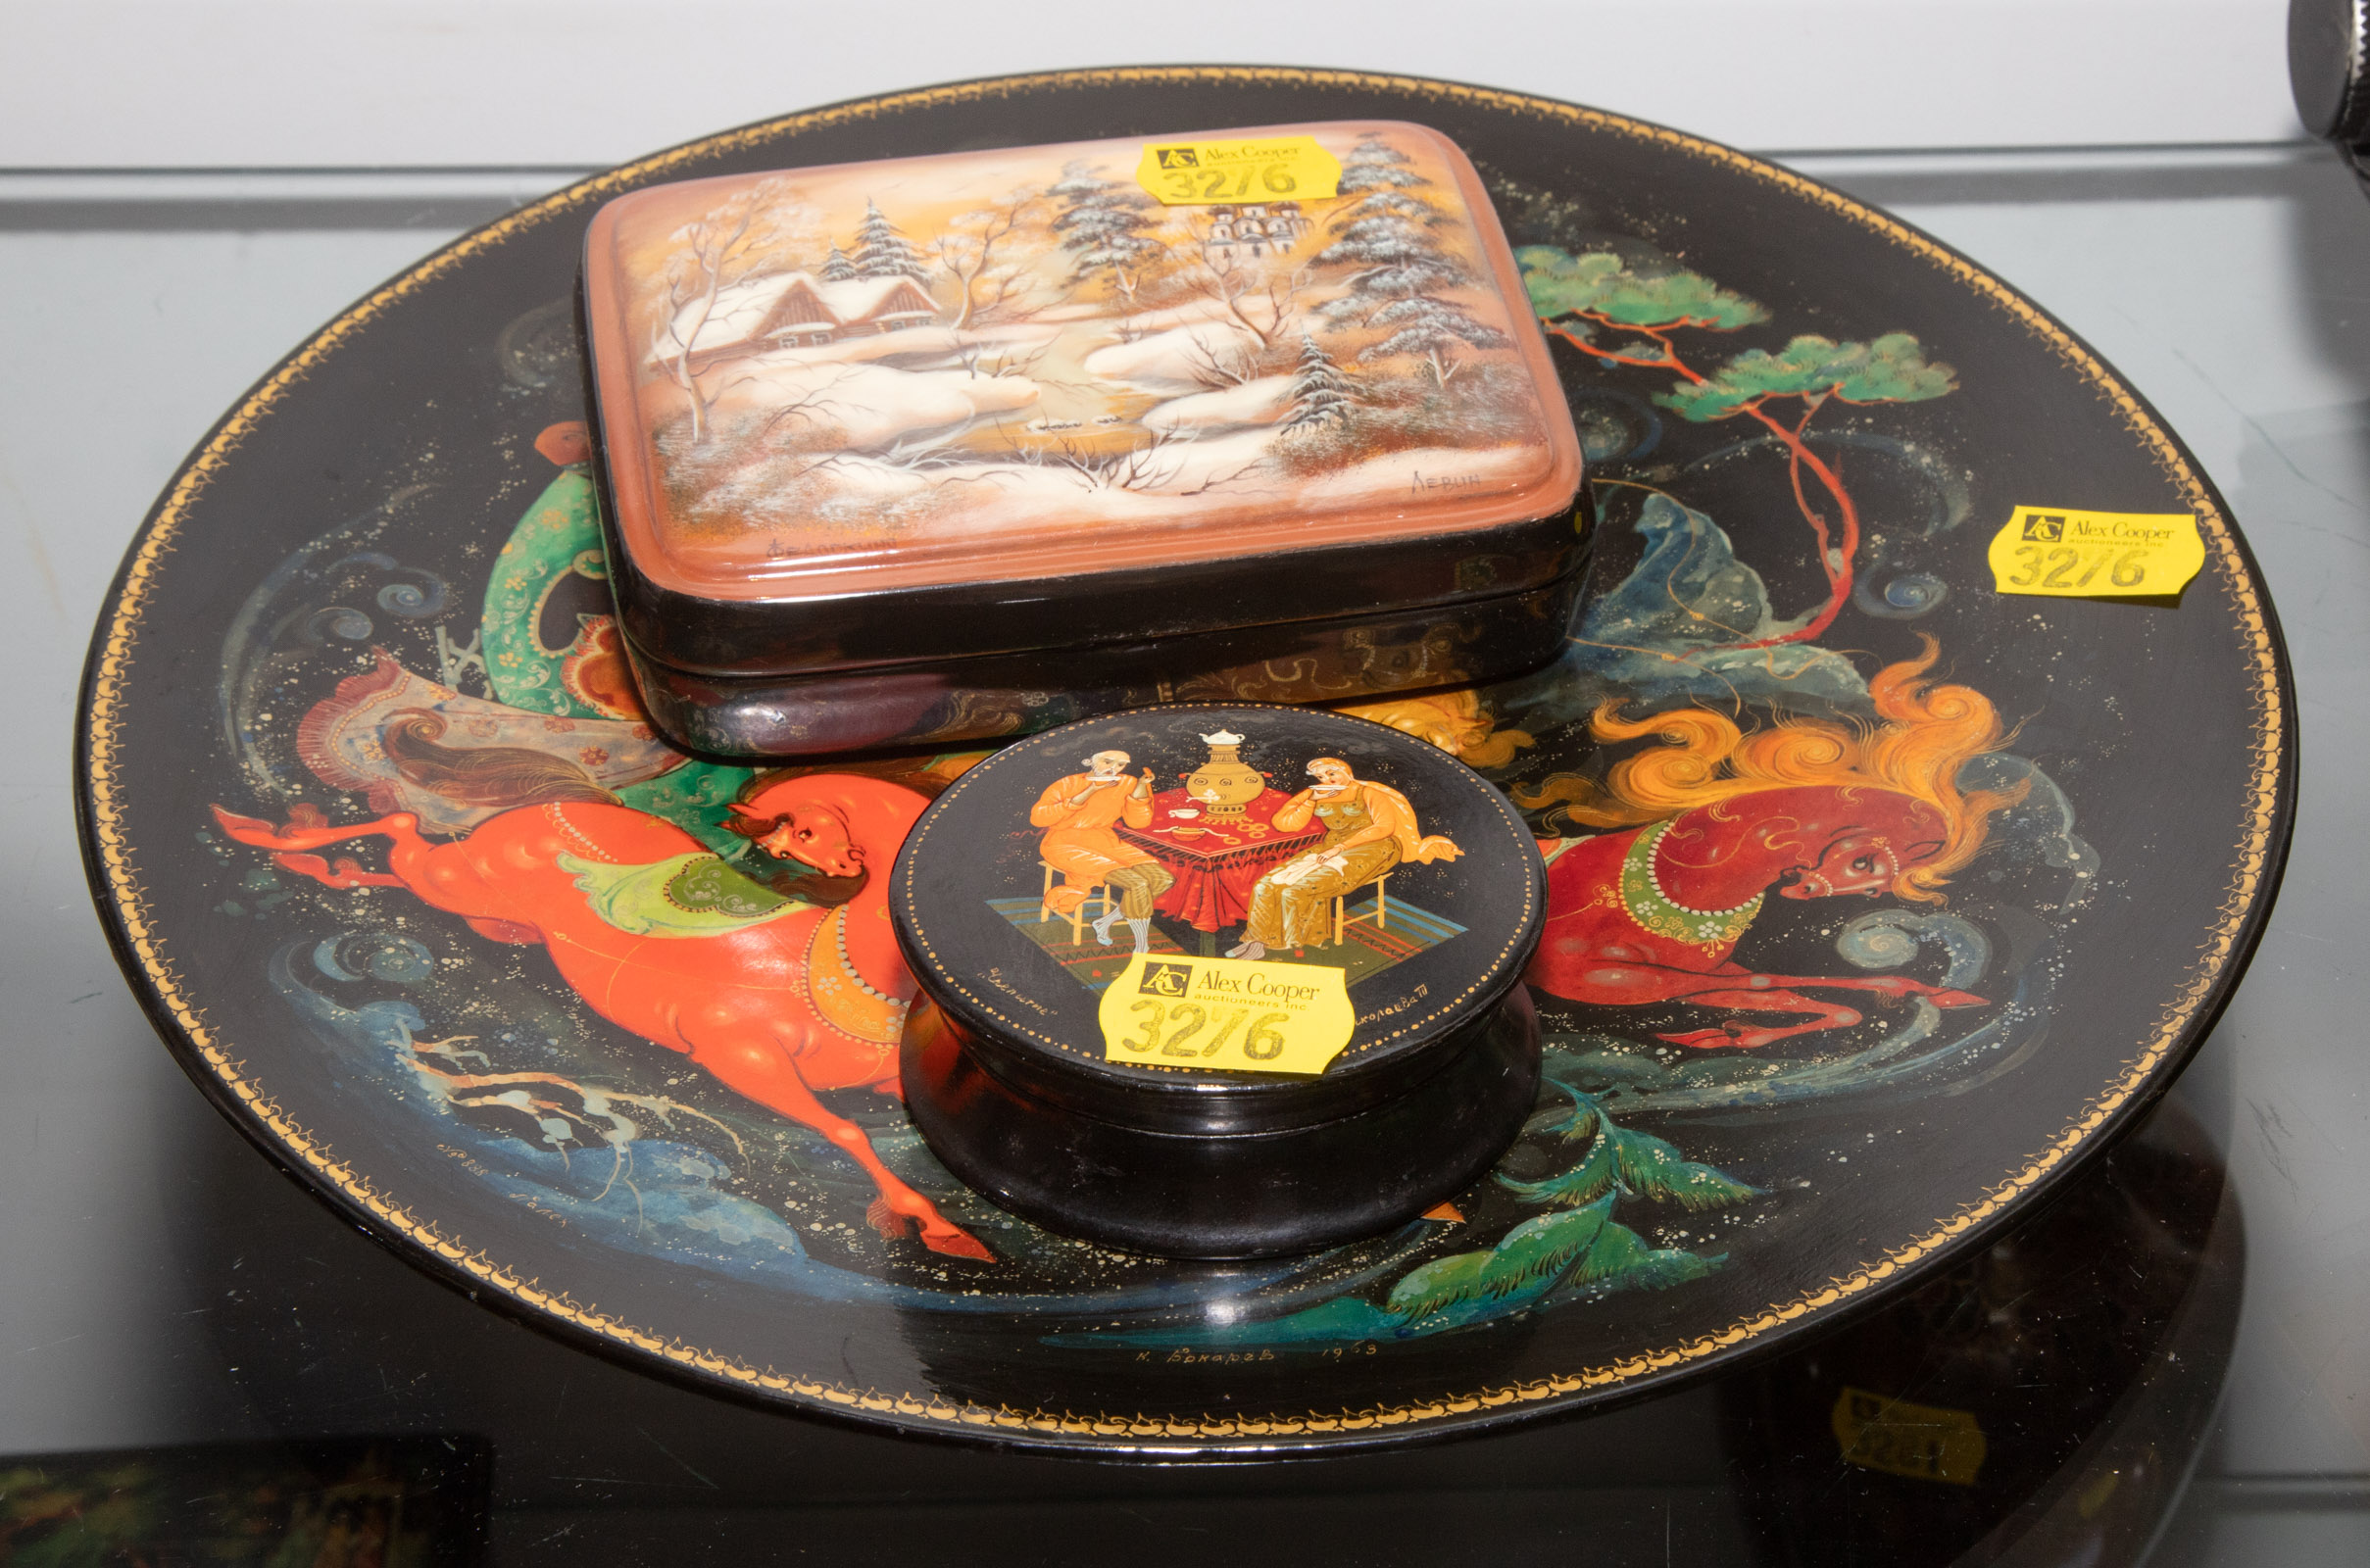 TWO RUSSIAN LACQUER BOXES PLATE 33557b